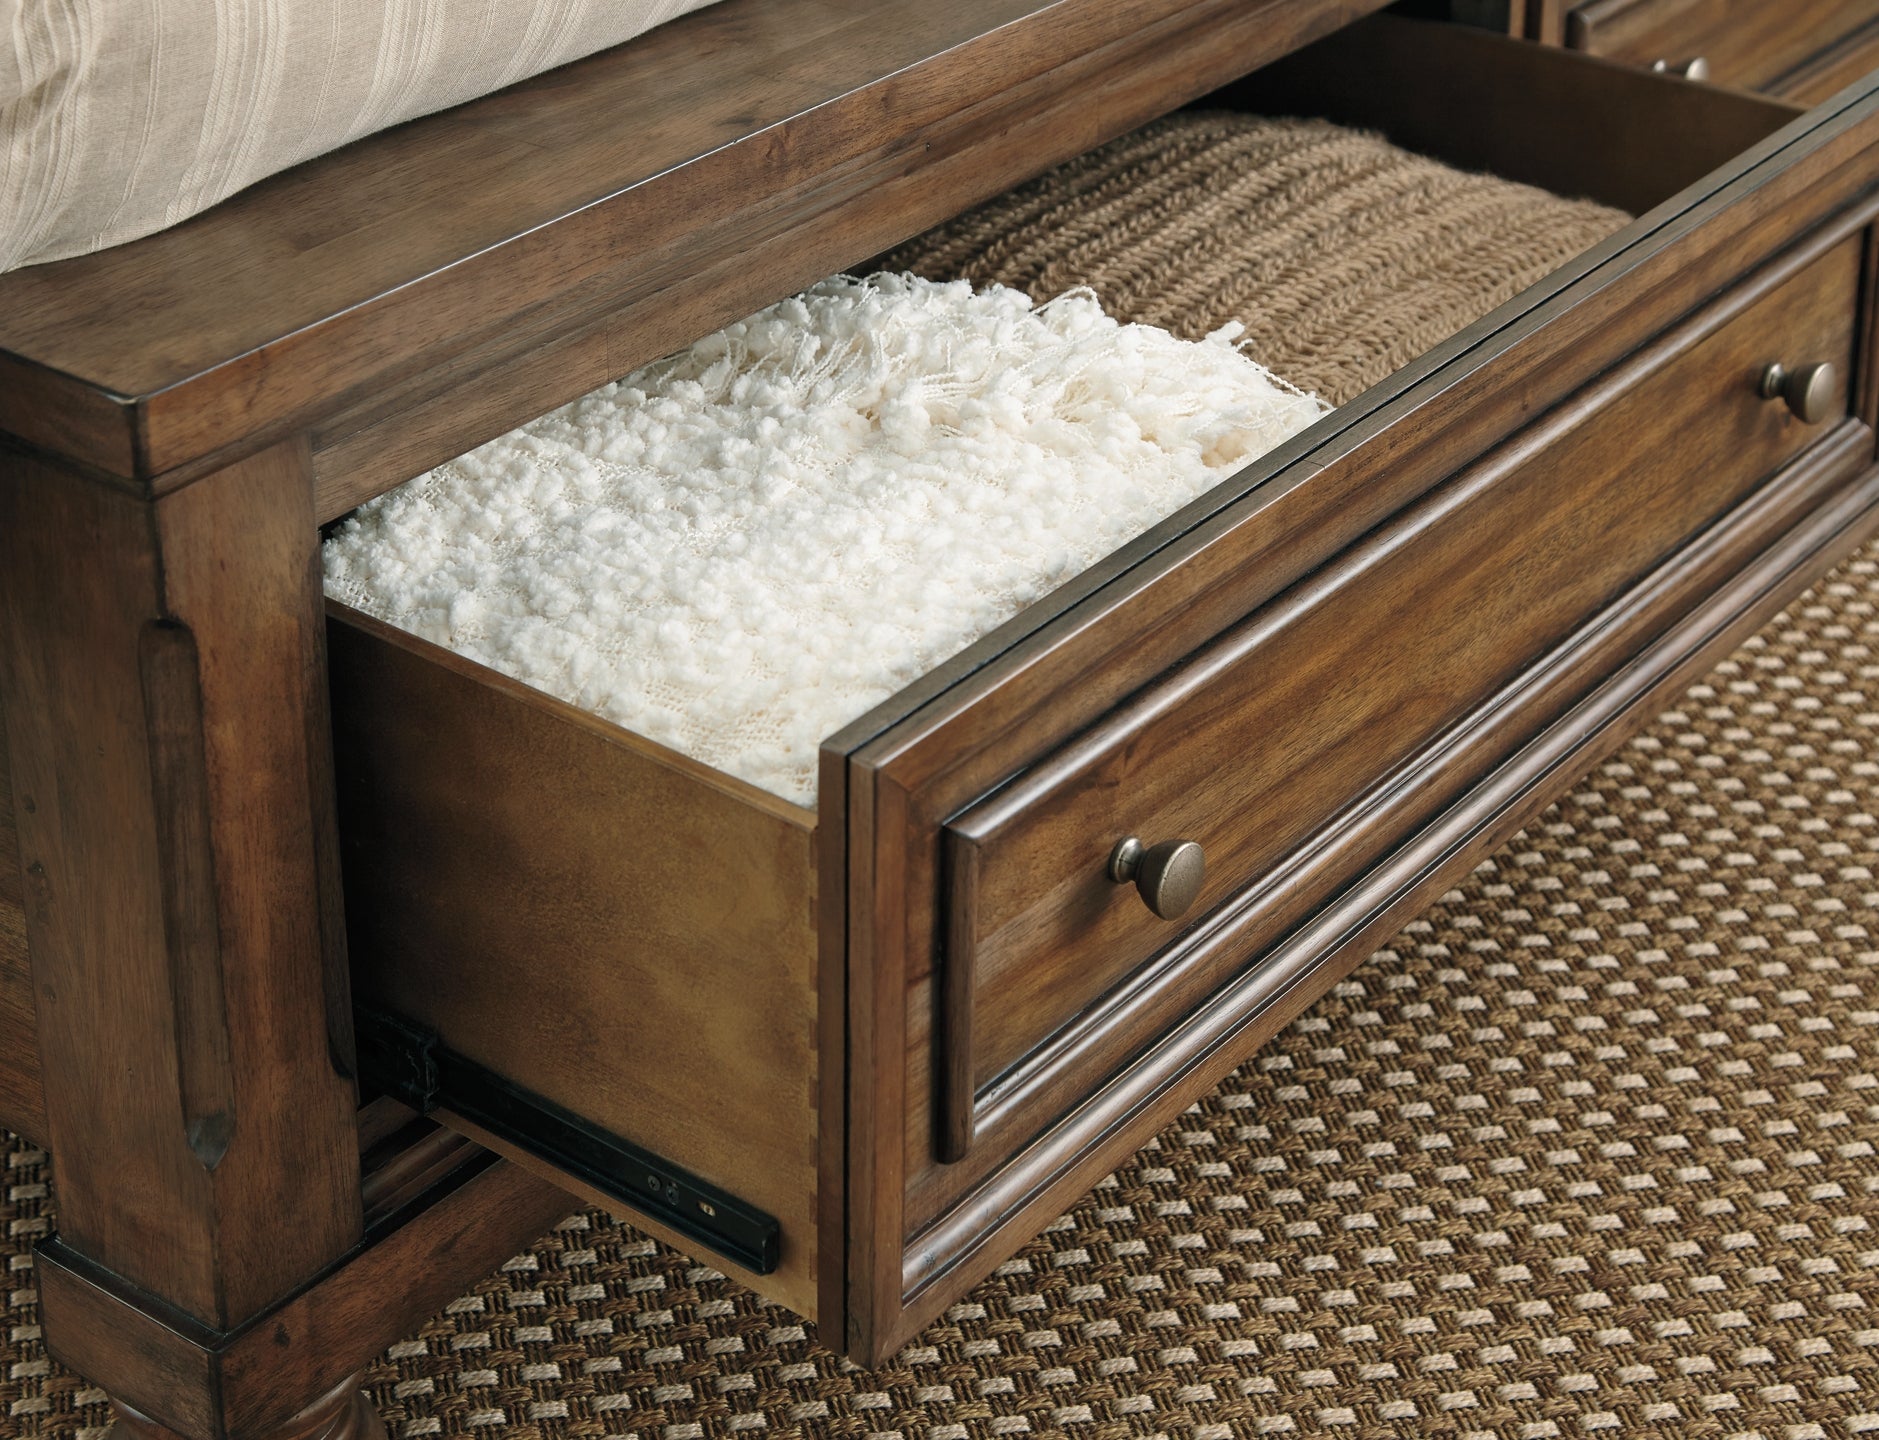 Flynnter King Panel Bed with 2 Storage Drawers with Mirrored Dresser, Chest and Nightstand Signature Design by Ashley®